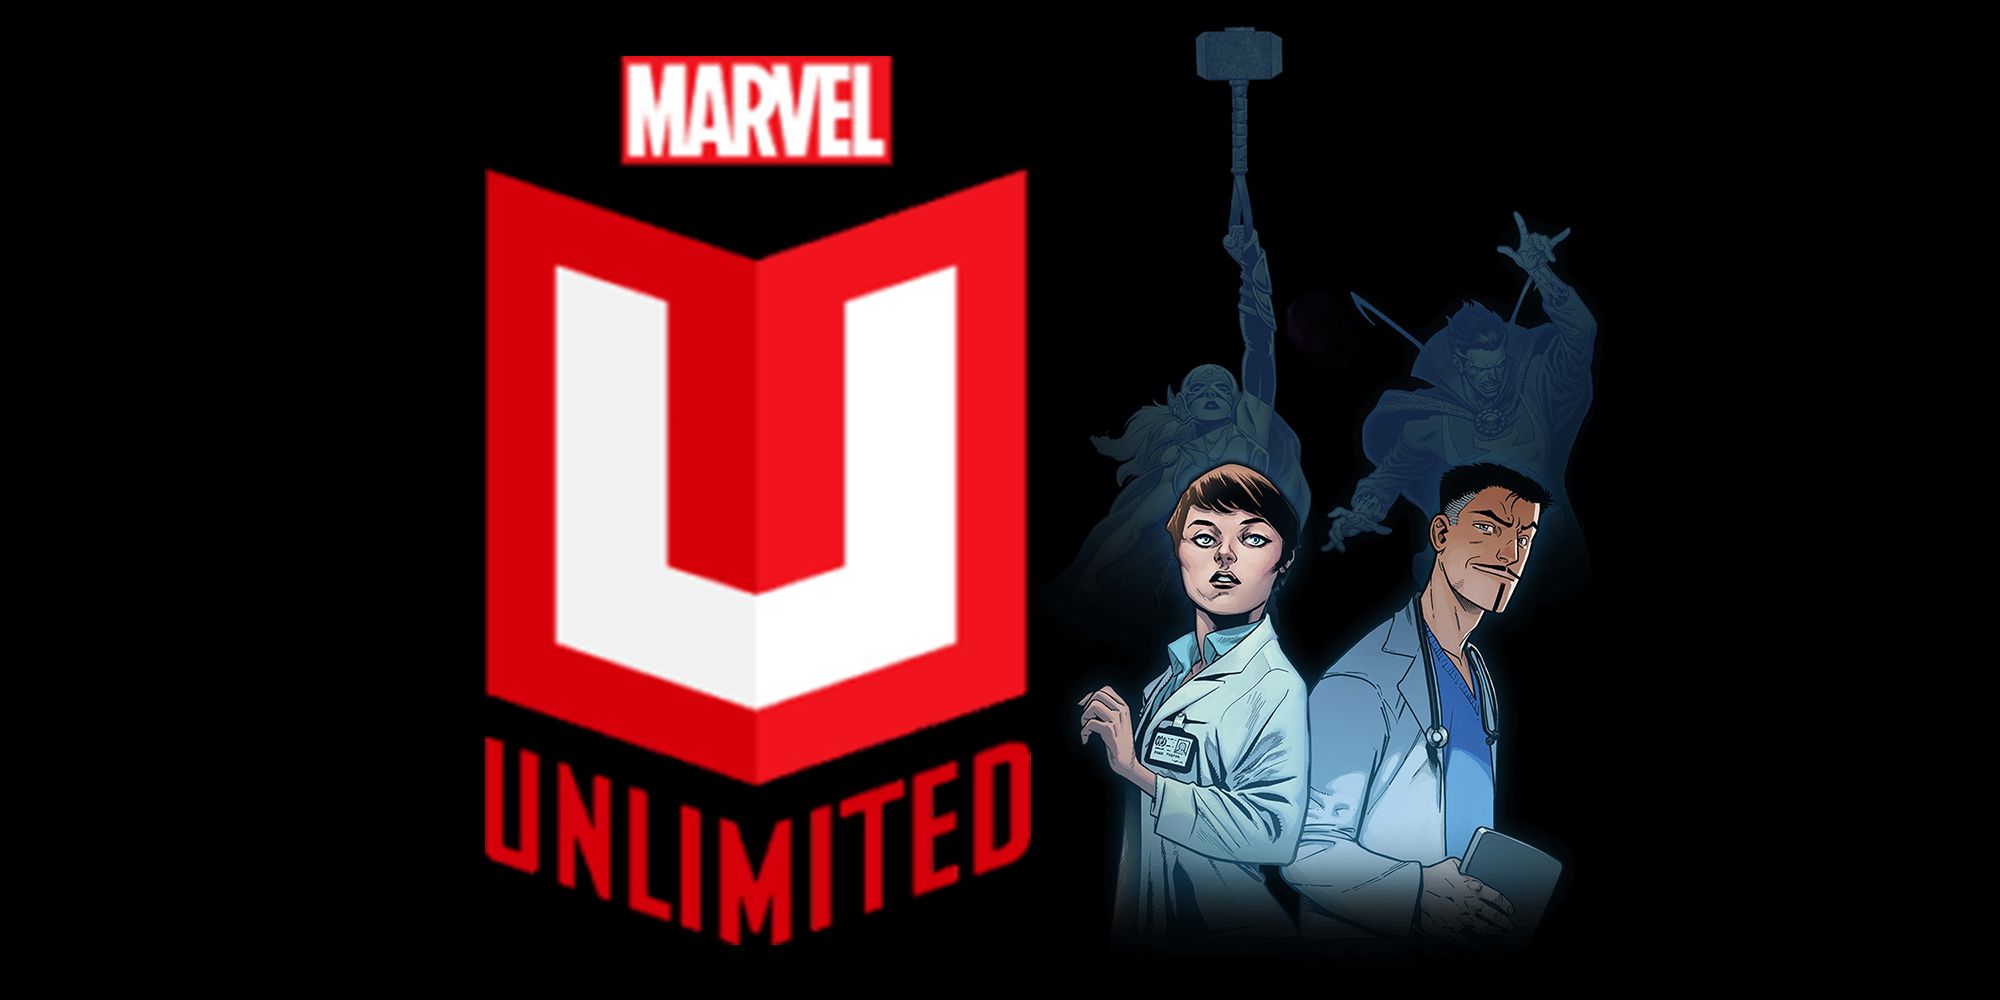 everything new on marvel unlimited: week of may 4, 2020